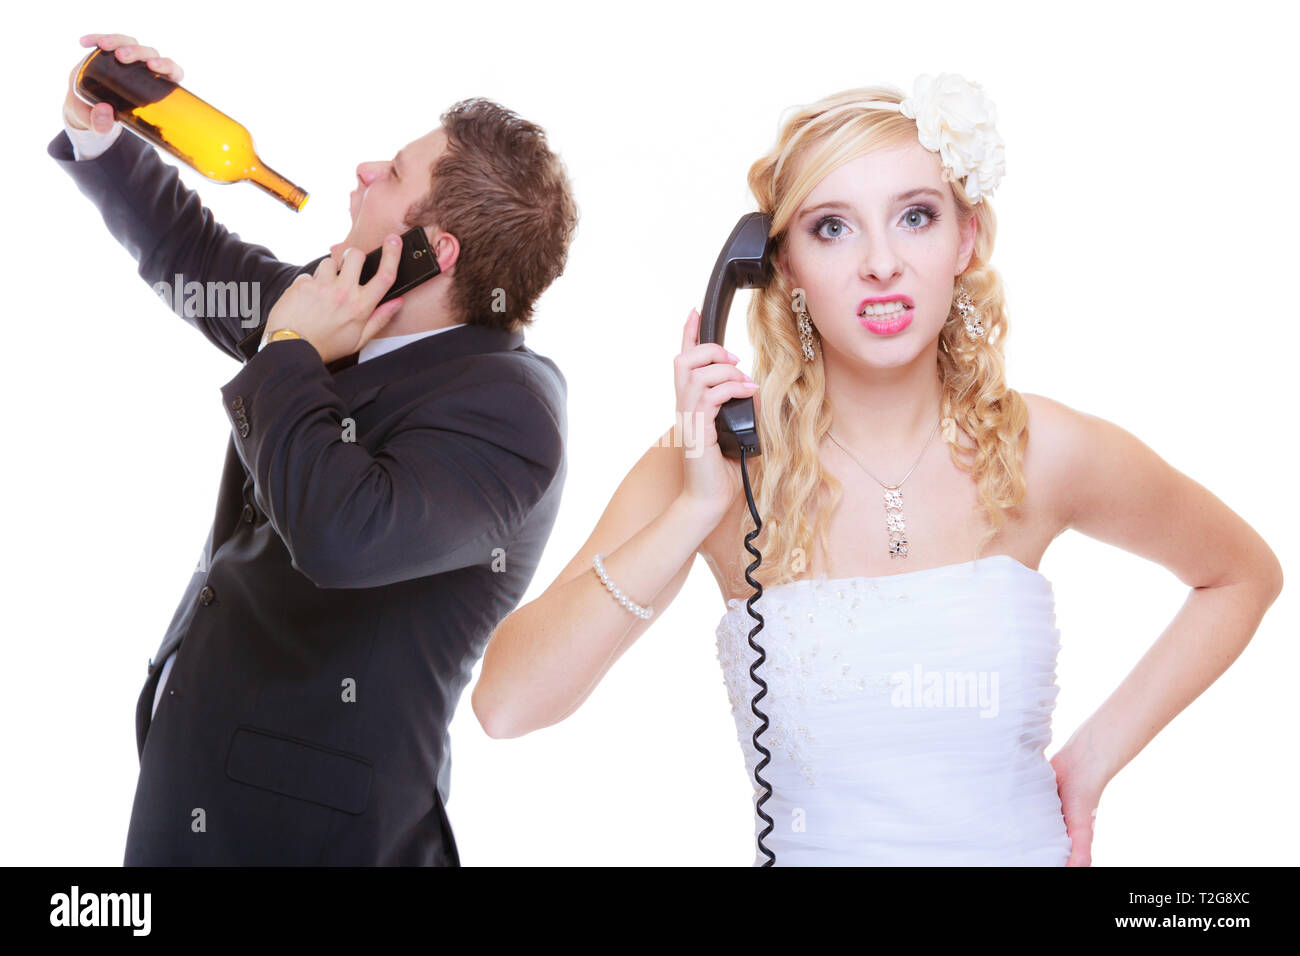 Addiction in relationship, marriage problems and troubles concept. Bride having argument with drunk alcoholic groom, she is calling for help Stock Photo